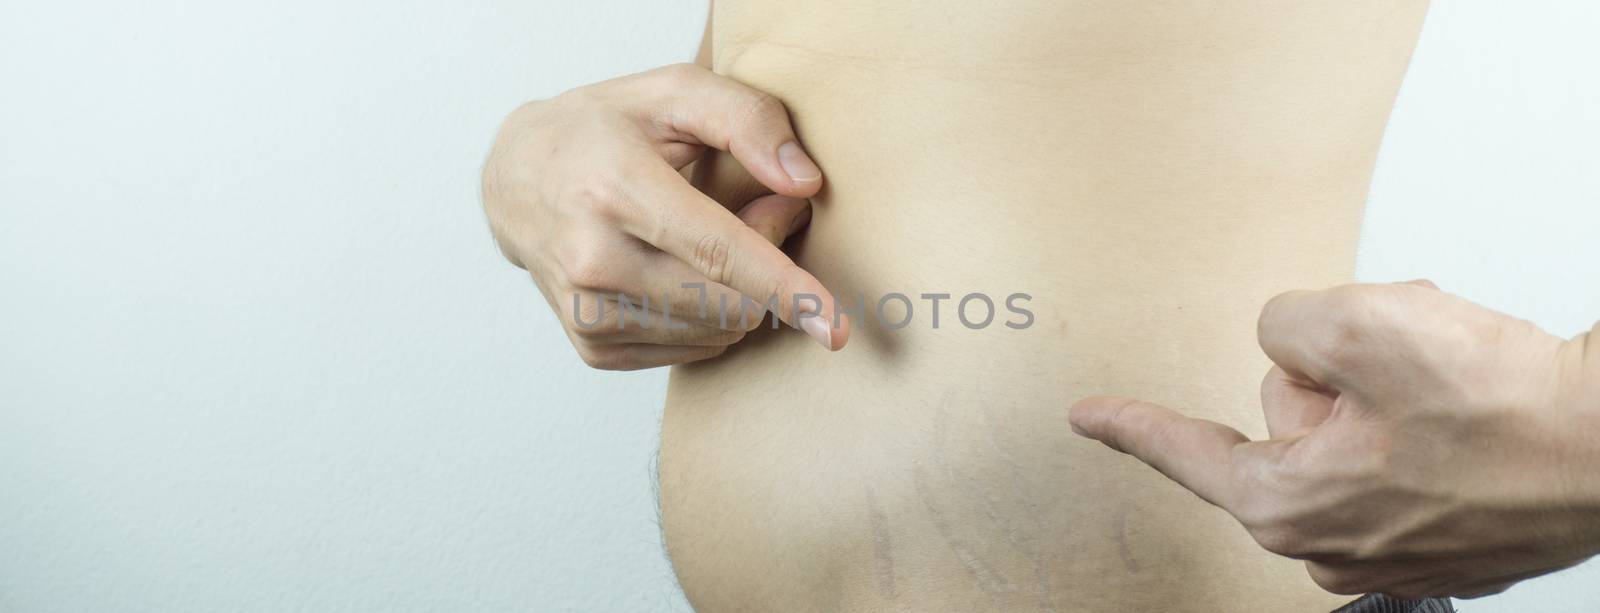 Man showing and pointing to the belly with stretch marks on white background. Diet, weight loss, slim body, healthy lifestyle concept.